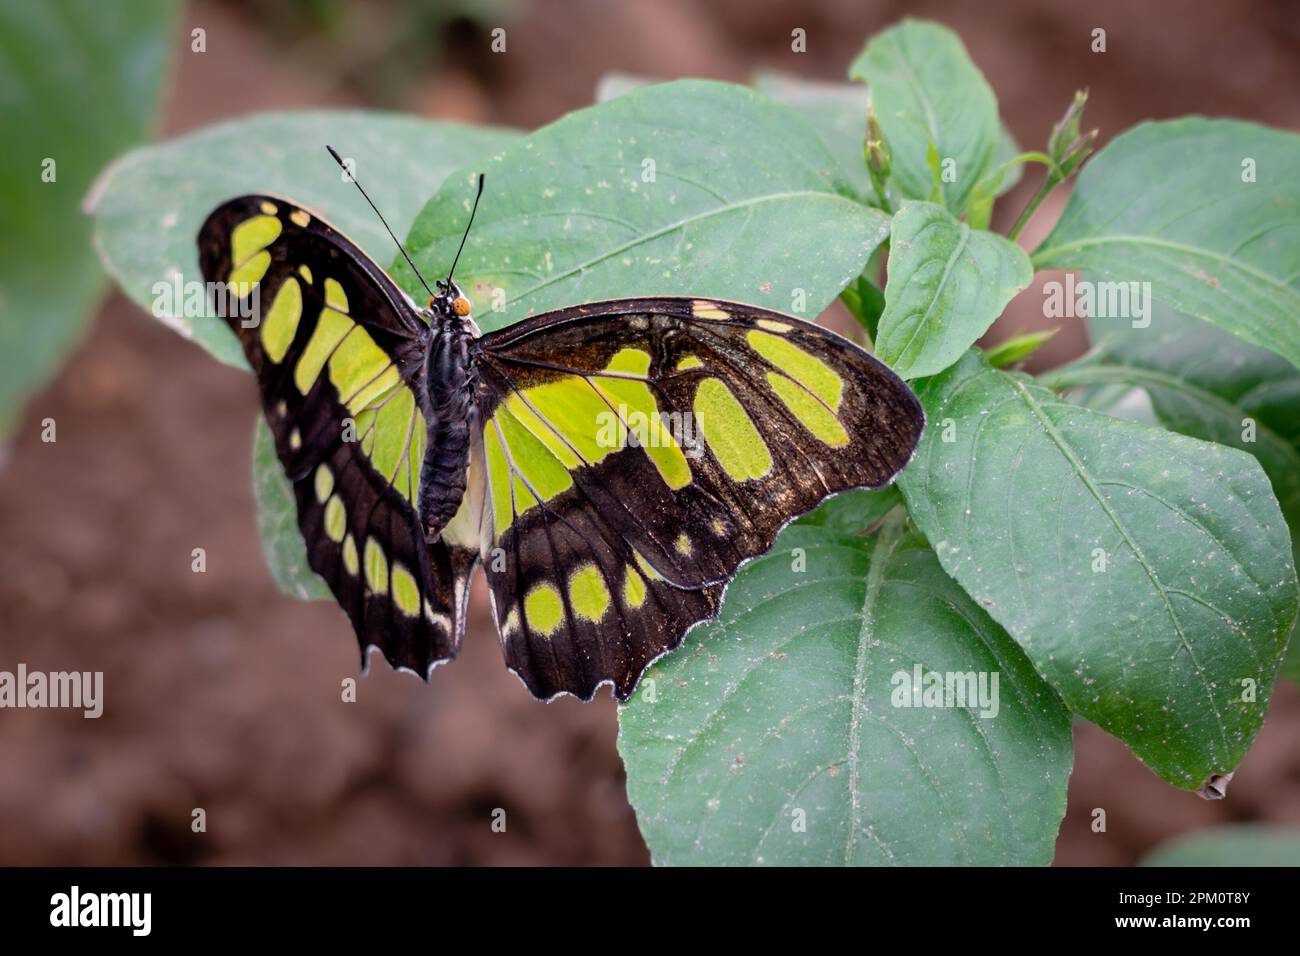 Malachite butterfly with wings open on plant Stock Photo